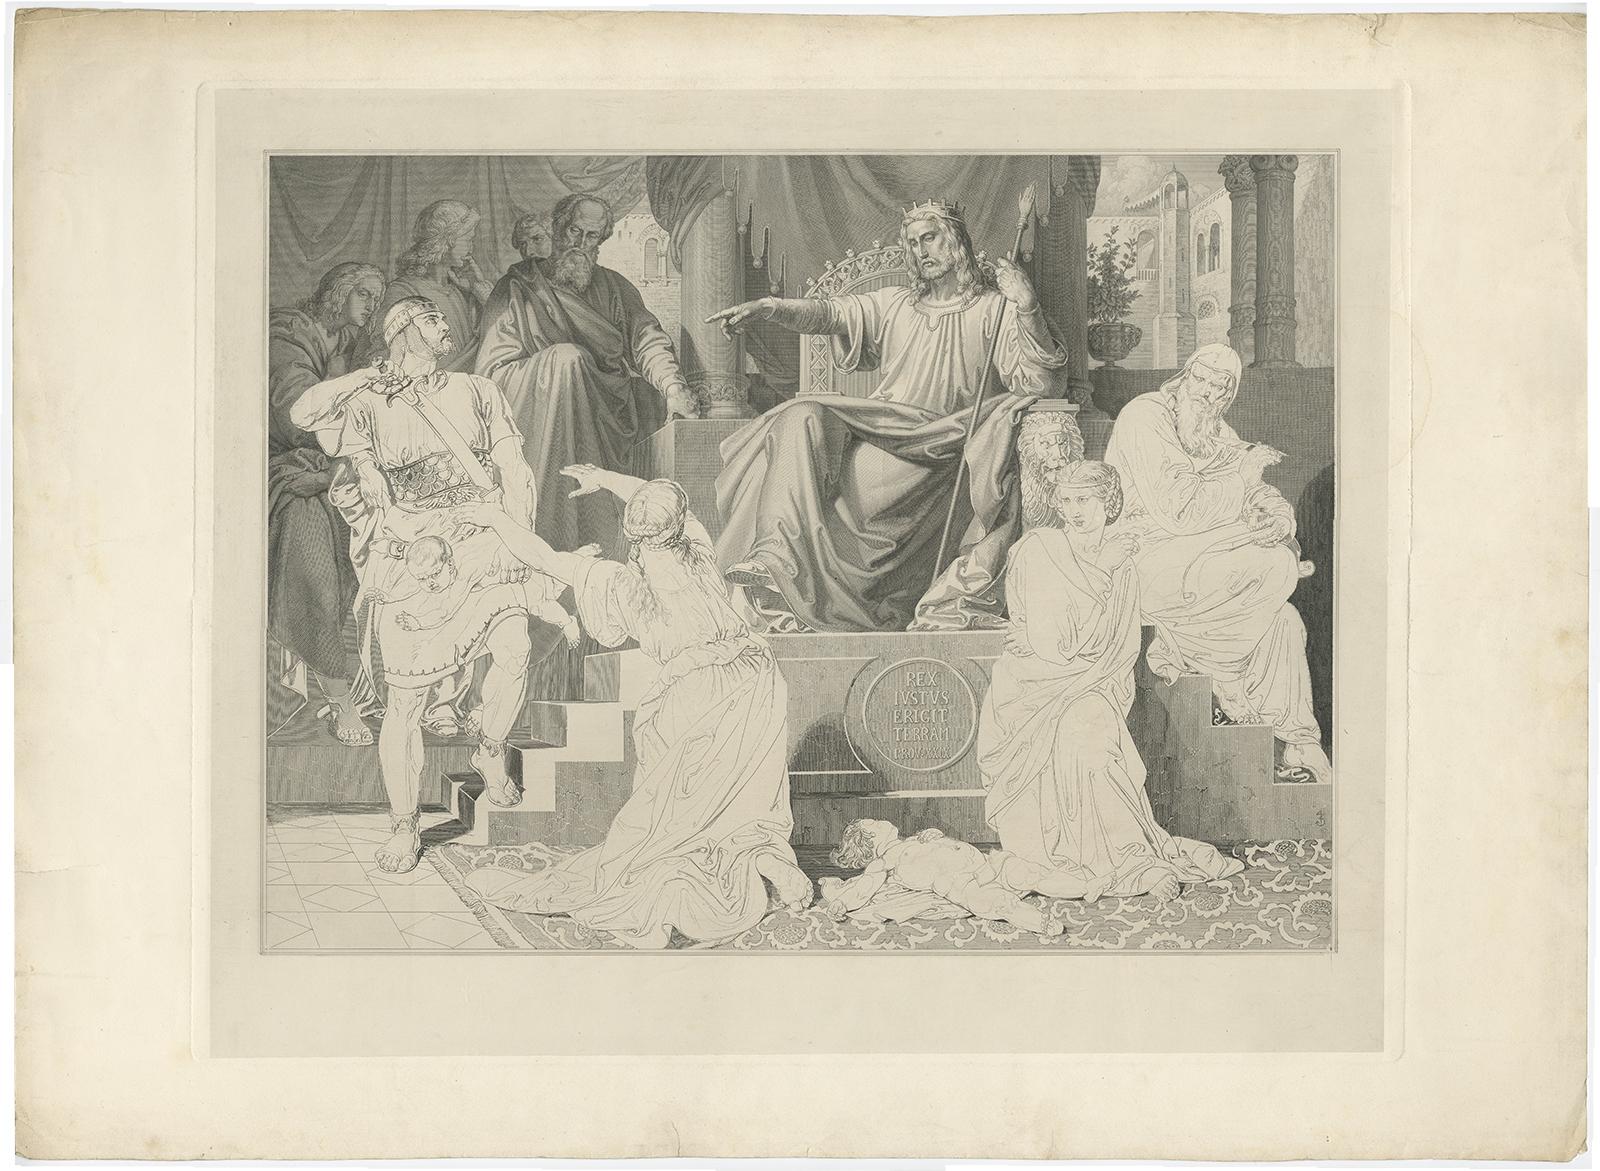 Untitled print depicting the Judgement of Solomon. 

The Judgment of Solomon is a story from the Hebrew Bible in which King Solomon of Israel ruled between two women both claiming to be the mother of a child.

Artists and Engravers: Anonymous.